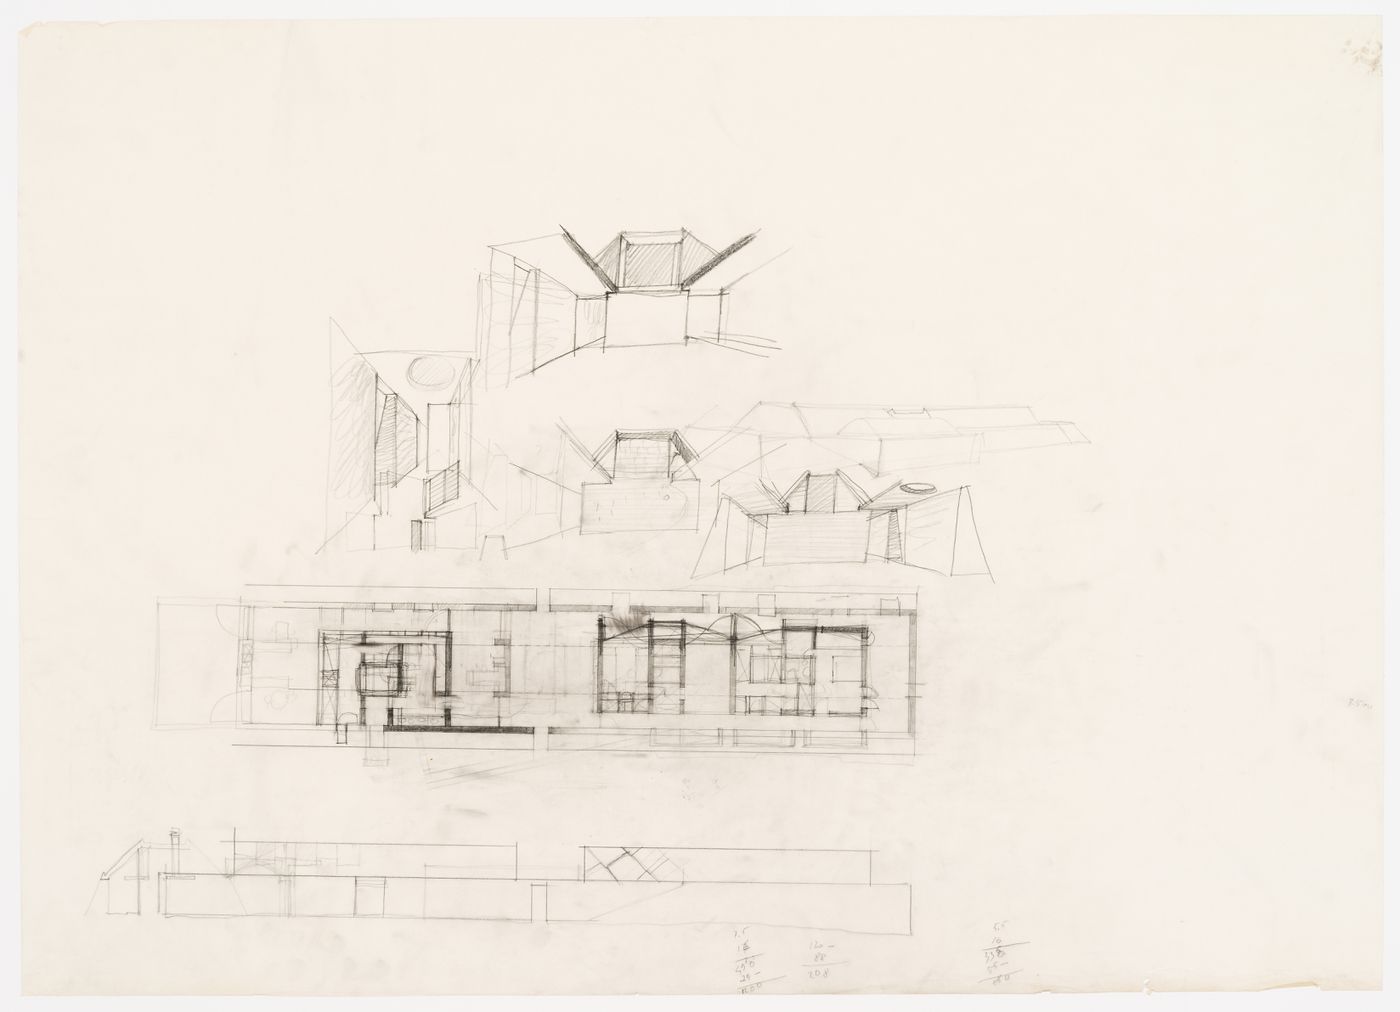 Sketch perspectives, floor plan and sketch of elevation for Casa Tabanelli, Stintino, Italy